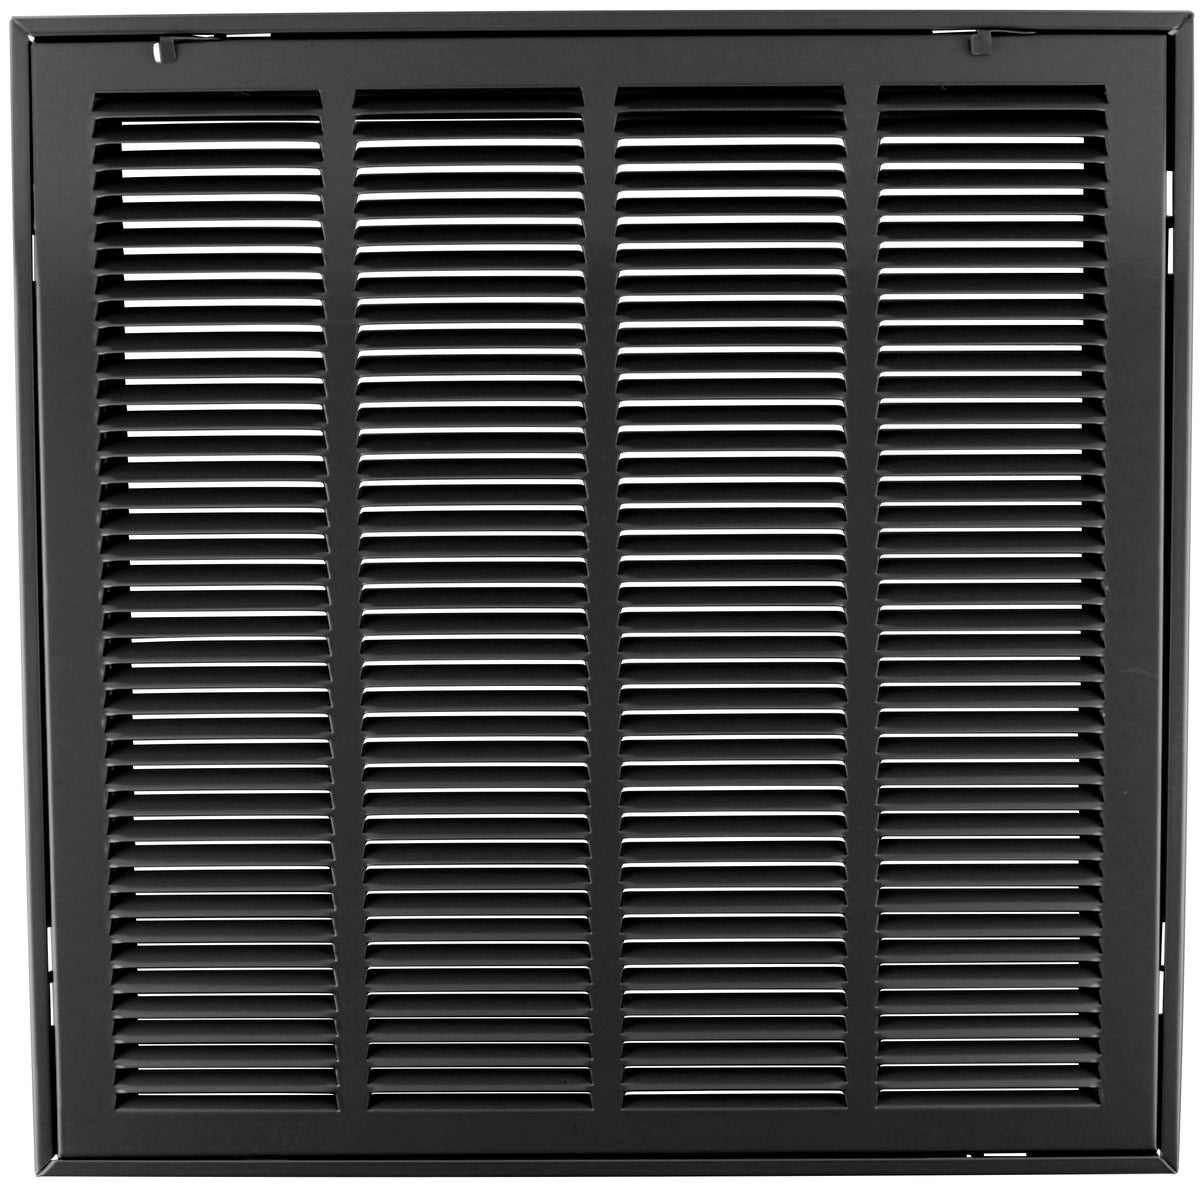 20&quot; X 25&quot; Steel Return Air Filter Grille for 1&quot; Filter - Removable Frame - Black - [Outer Dimensions: 22 5/8&quot; X 27 5/8&quot;]